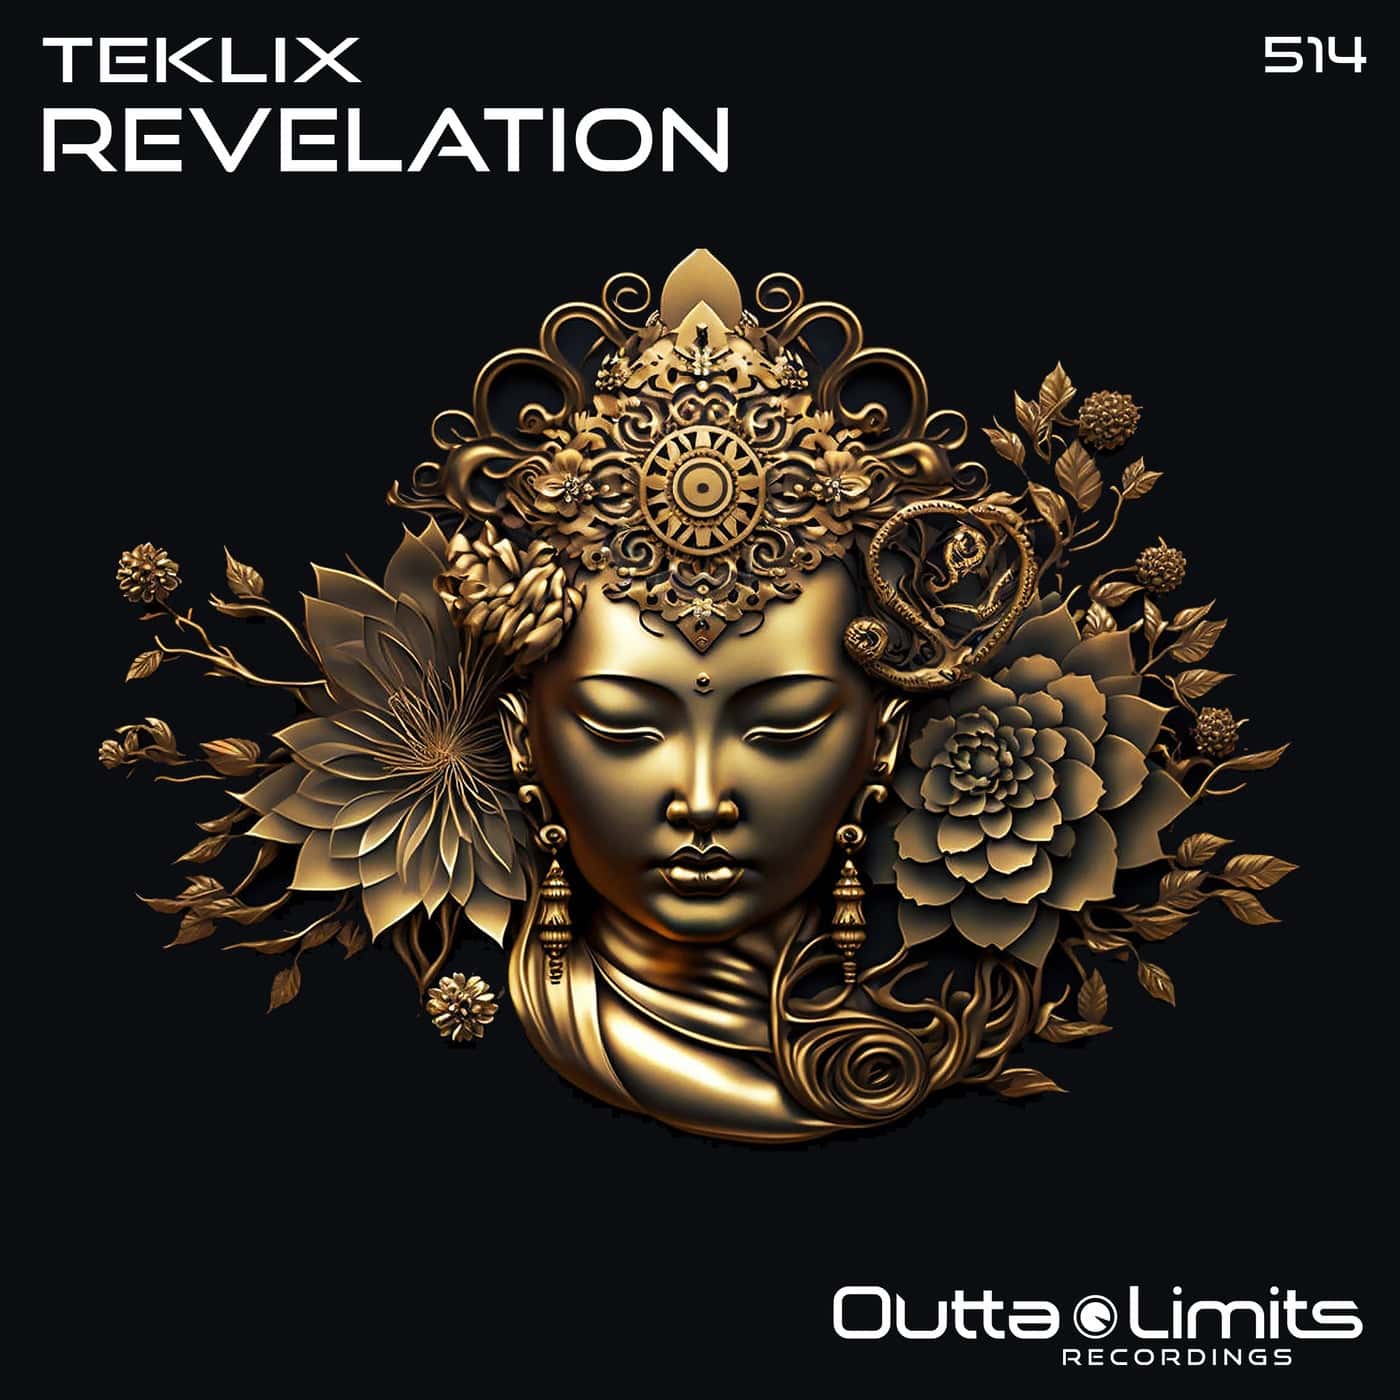 image cover: Revelation by Teklix on Outta Limits